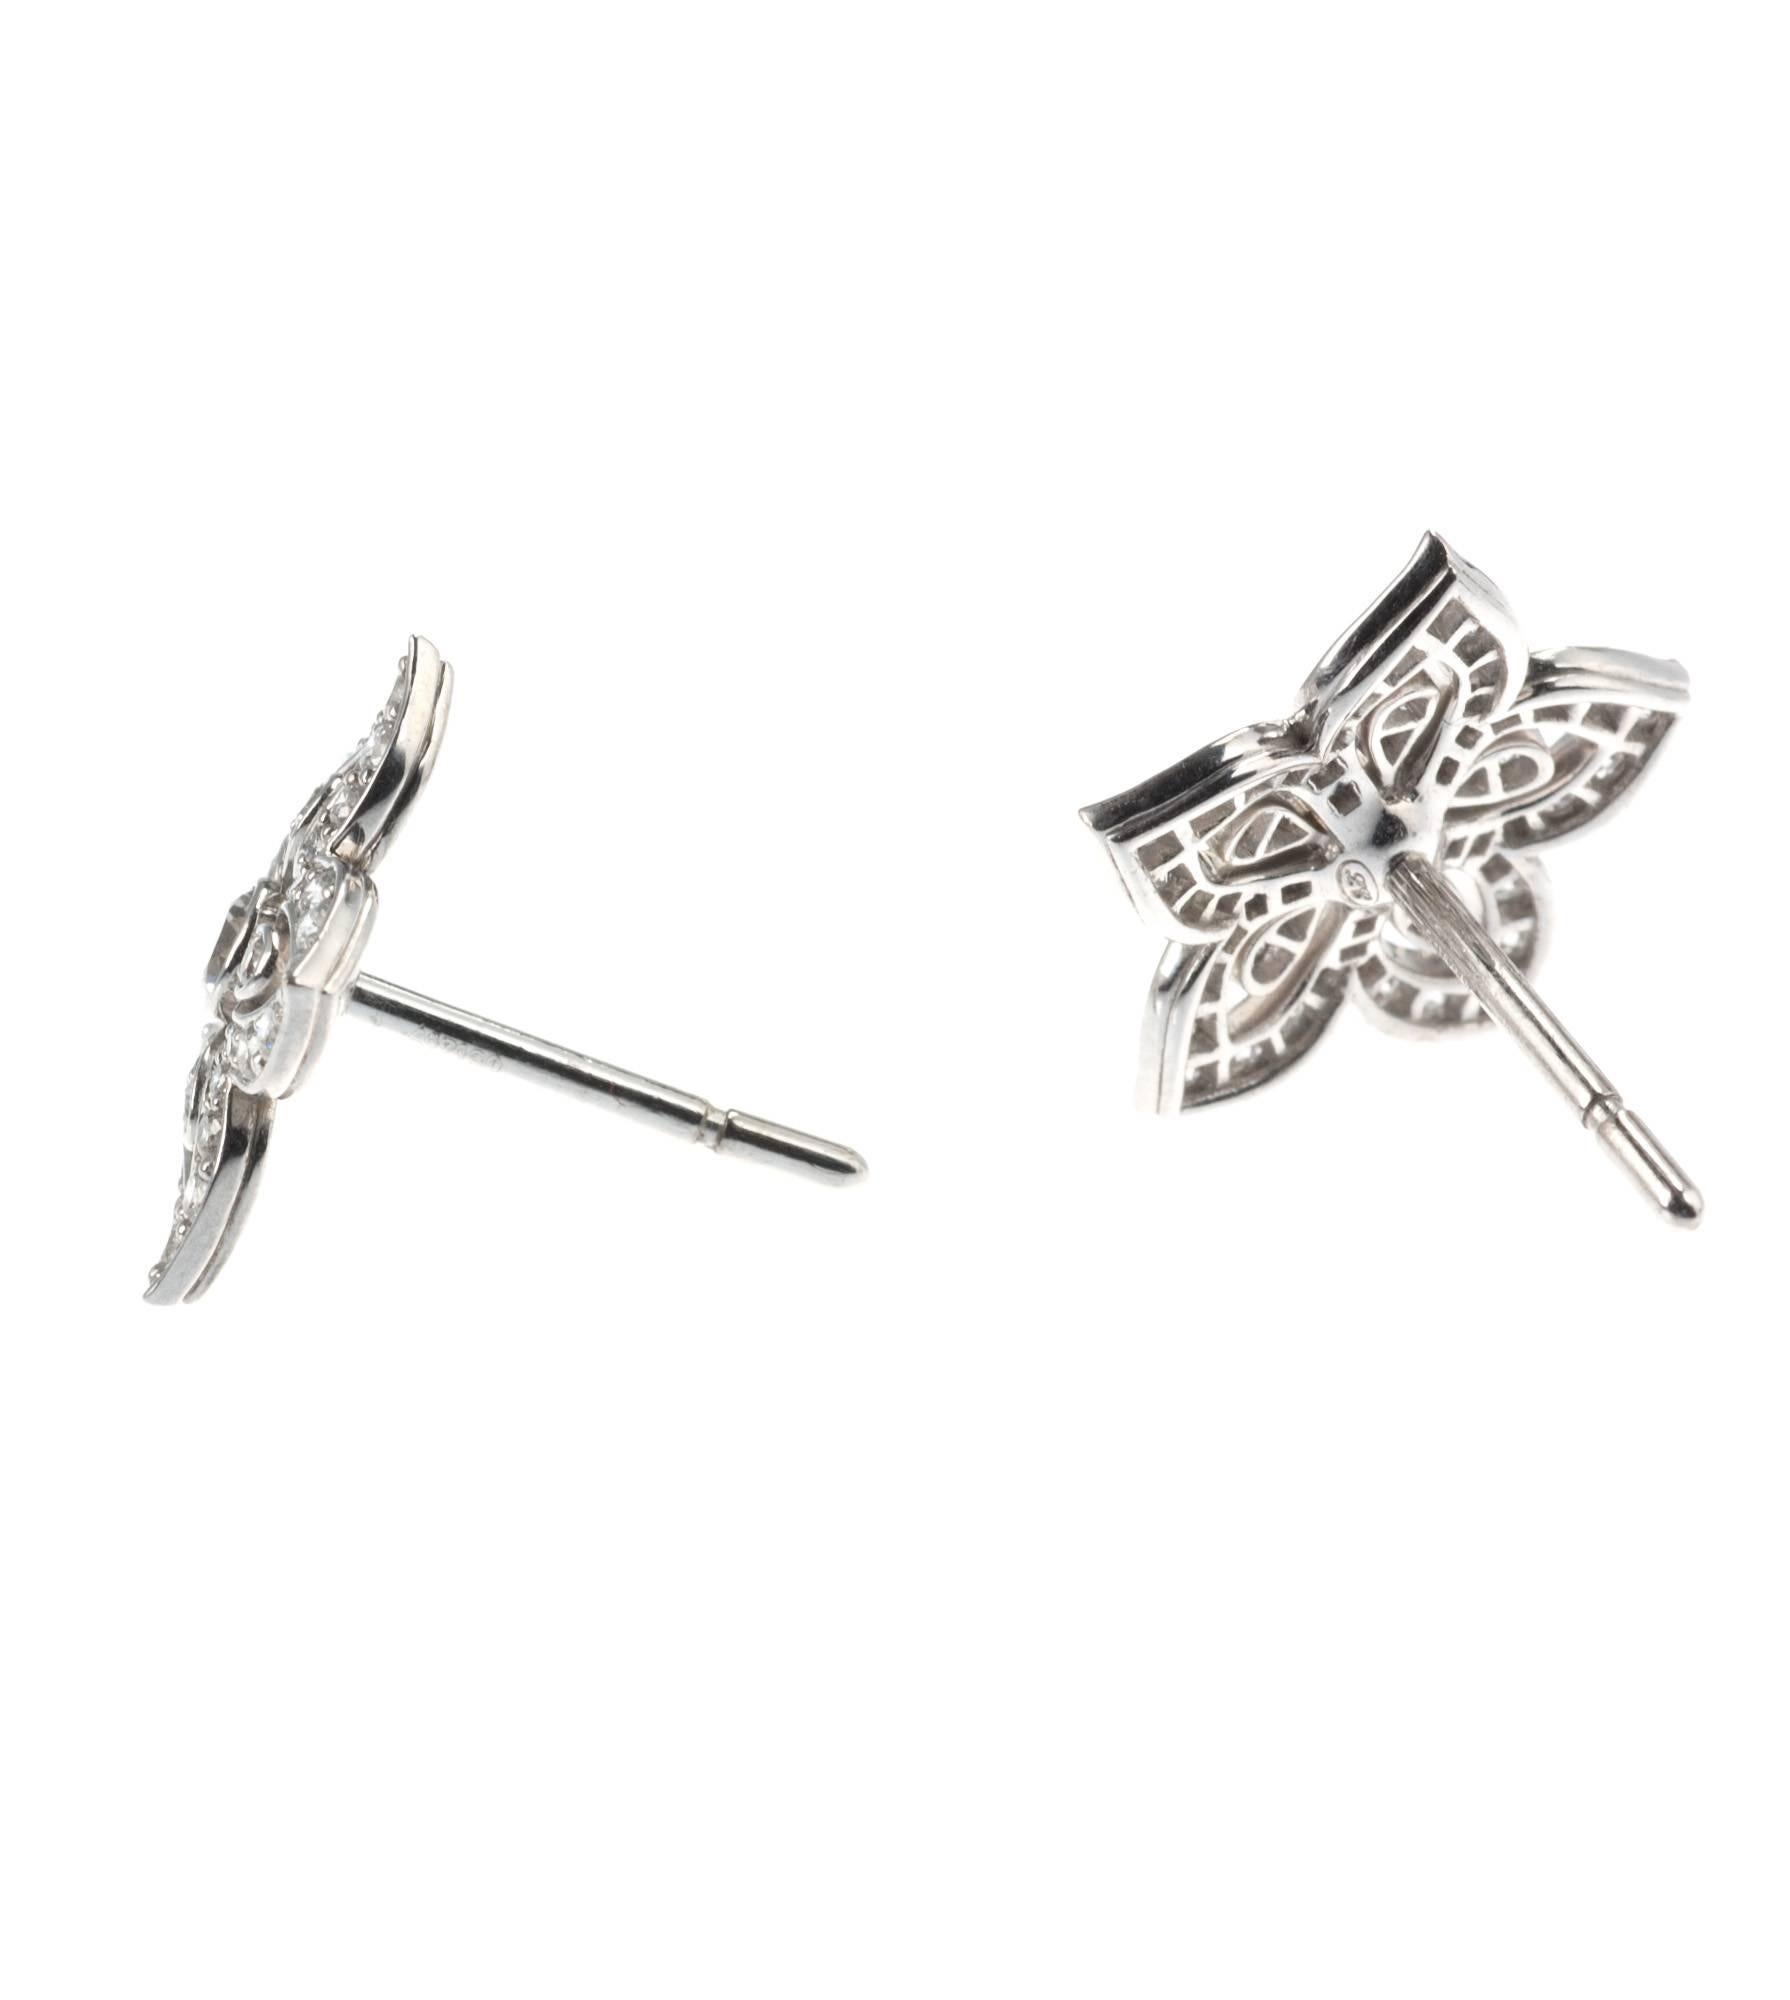 Contemporary Lucie Campbell Diamond Gold Flower Earrings